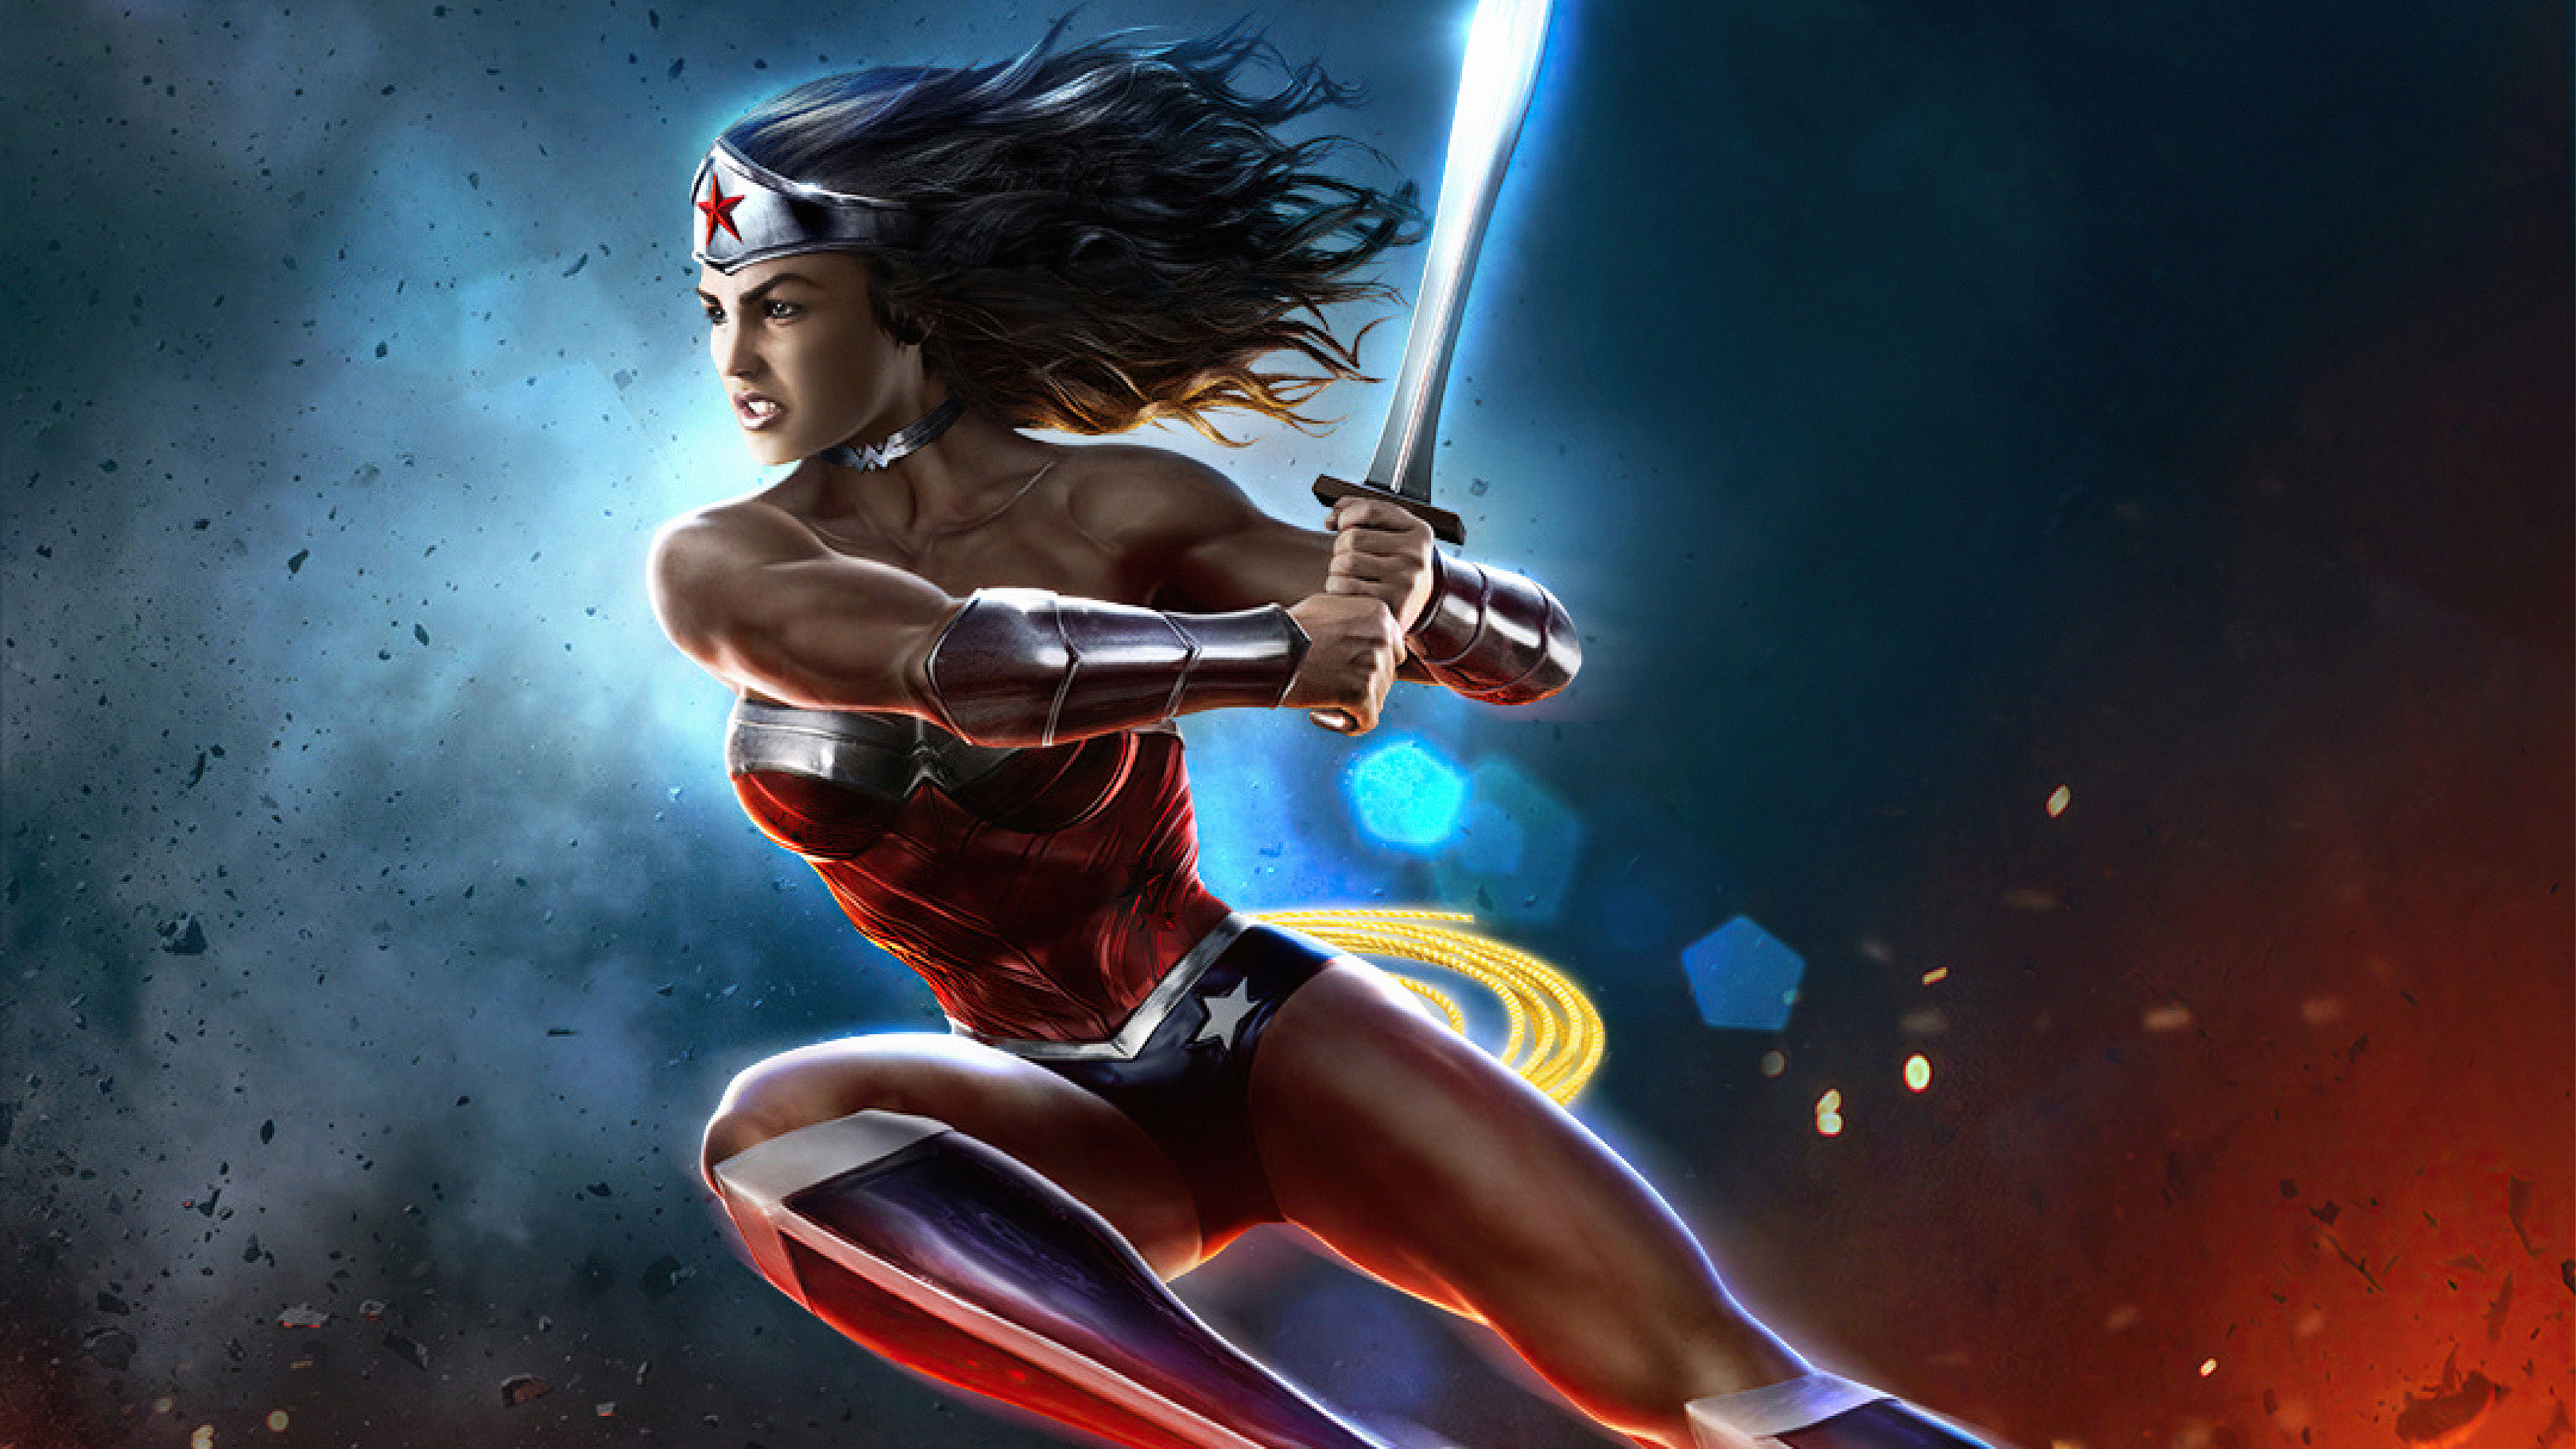 Photo Wonder woman artist movies - free pictures on Fonwall.